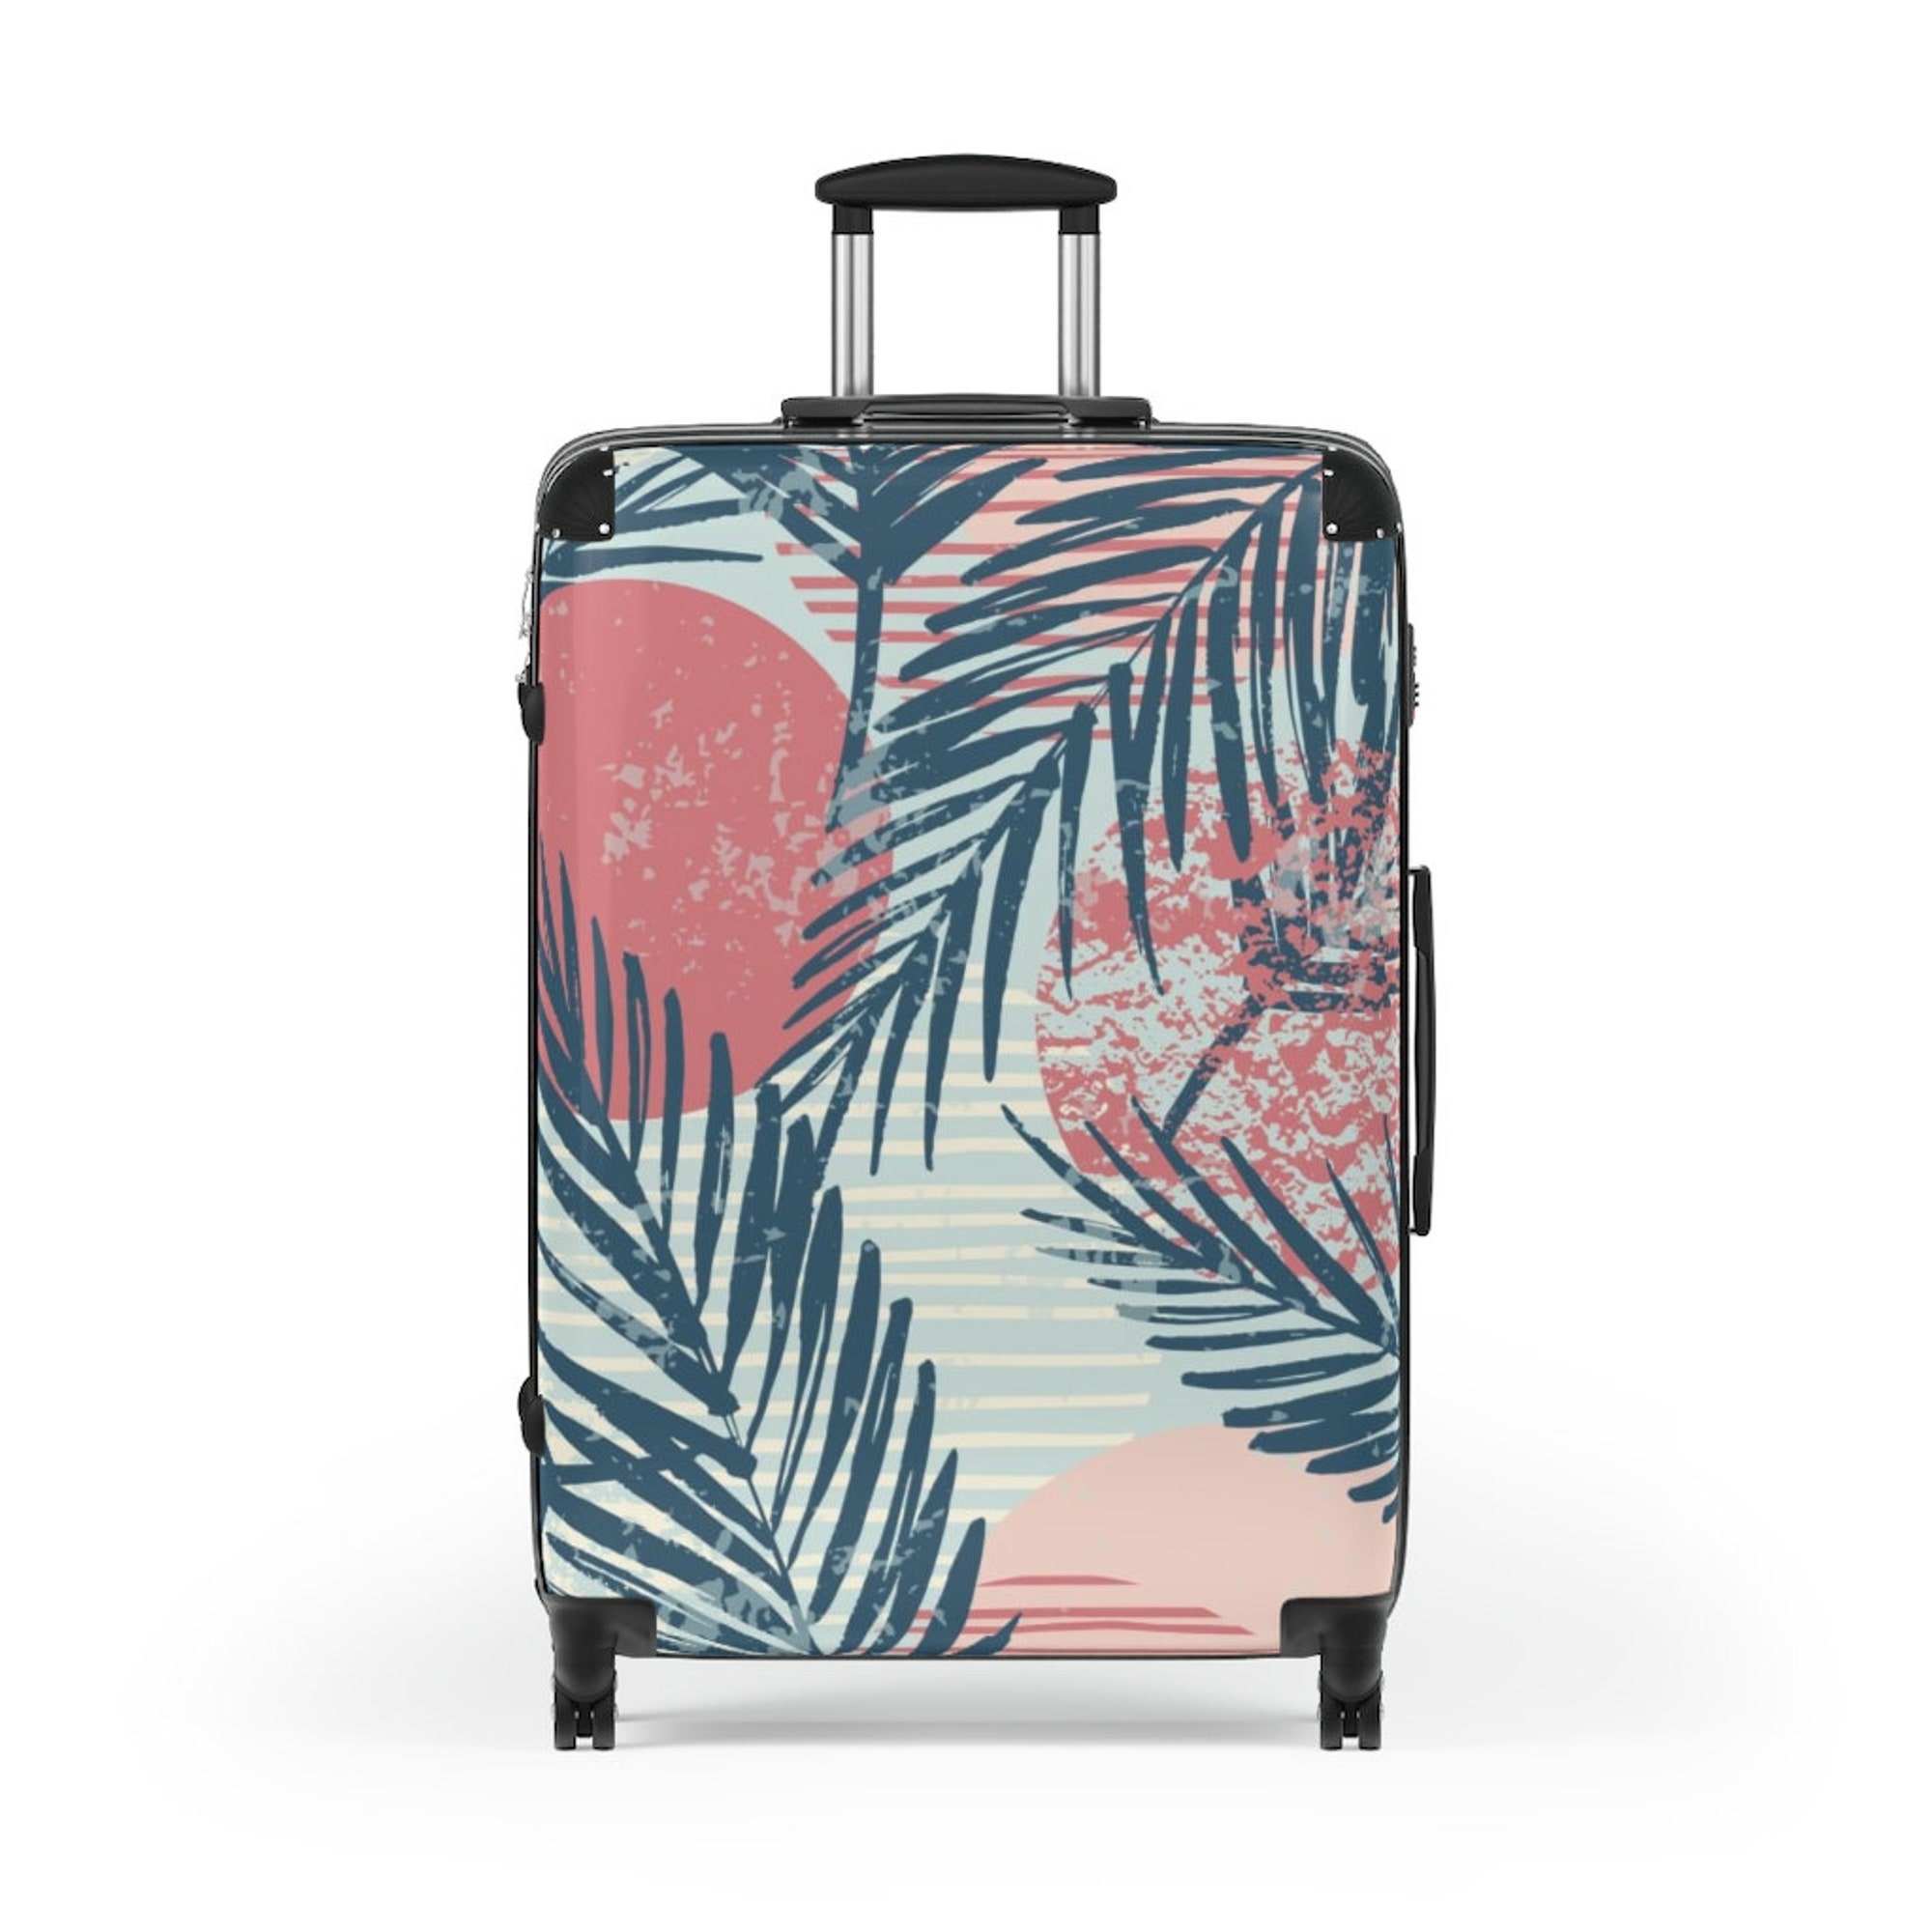 Discover The Marina Suitcase